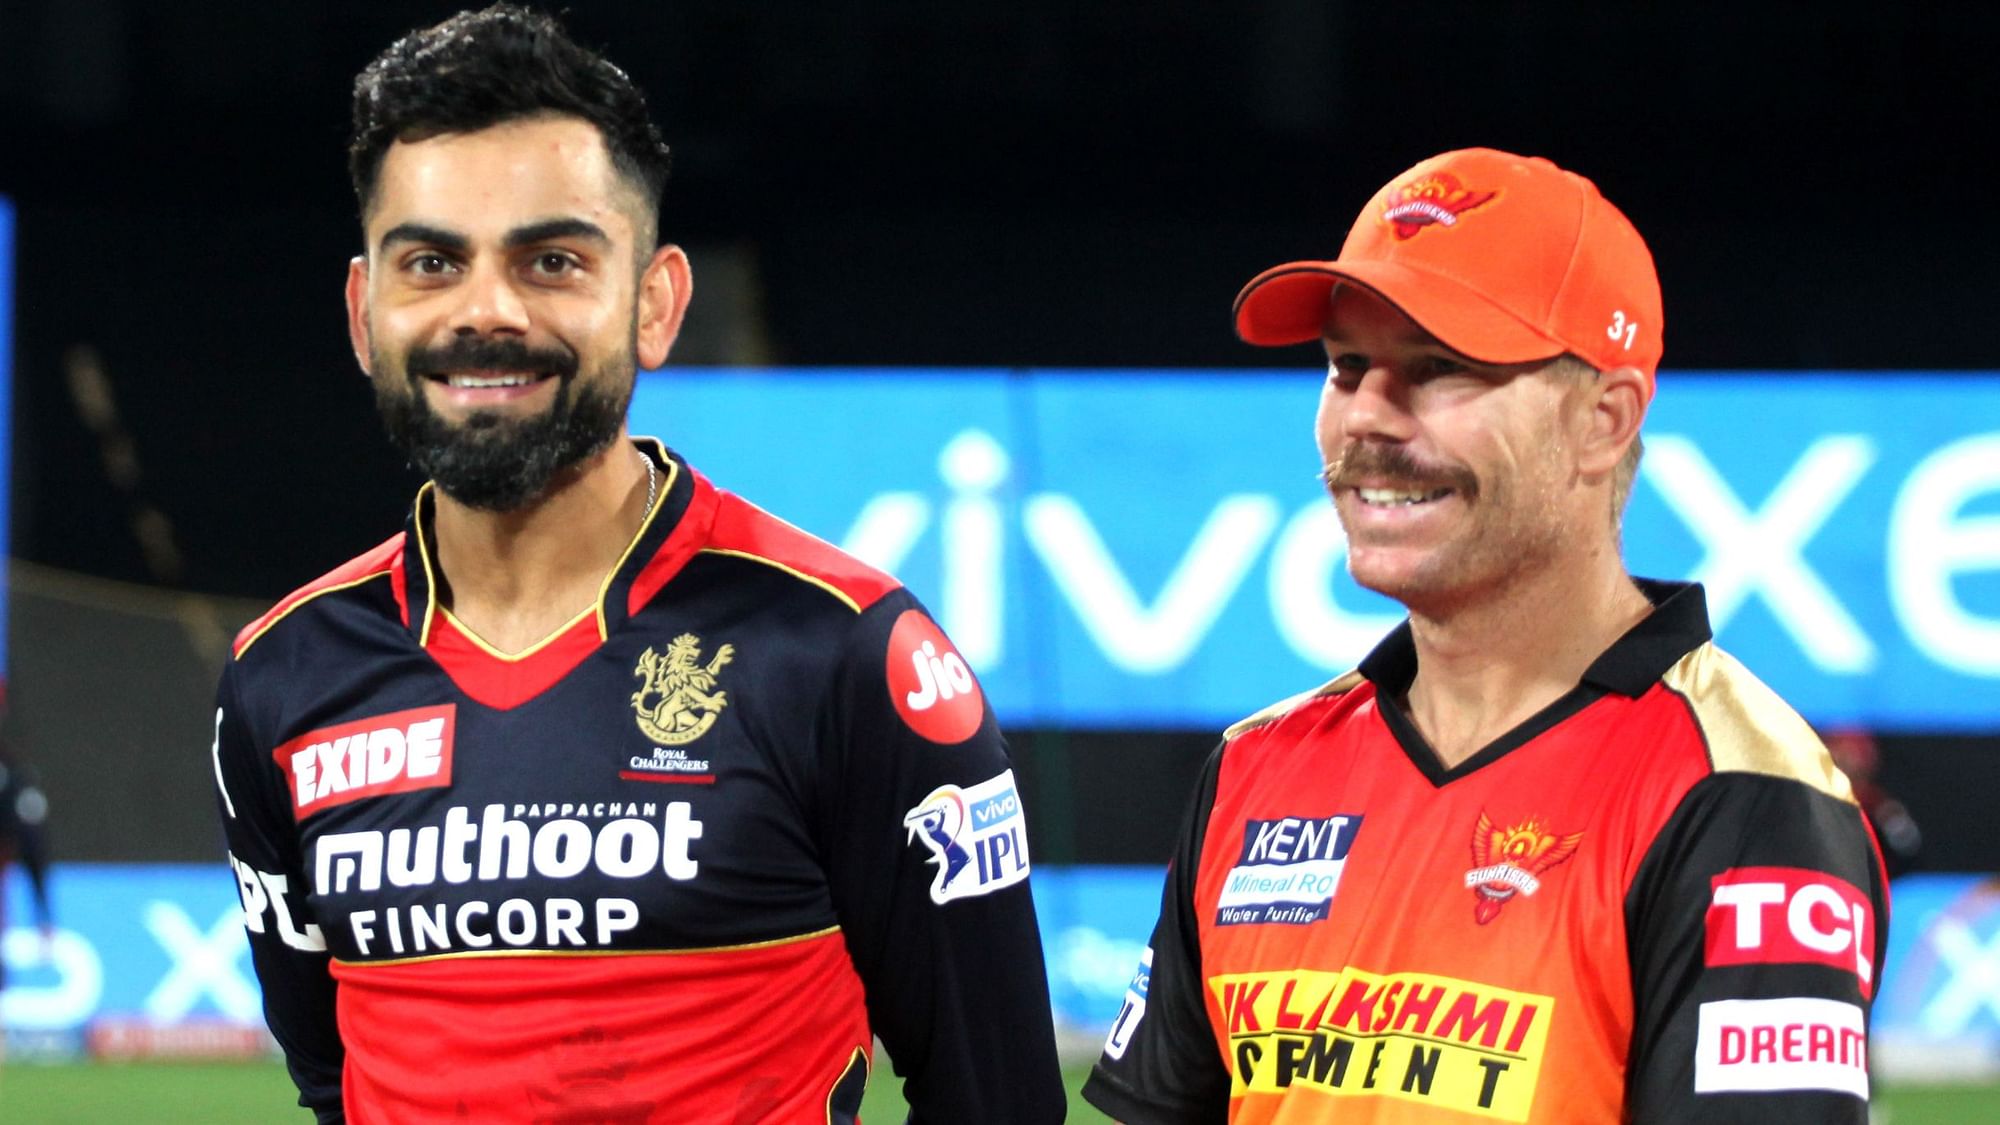 Sunrisers Hyderabad are playing Royal Challengers Bangalore in Match 6 of the 2021 IPL.